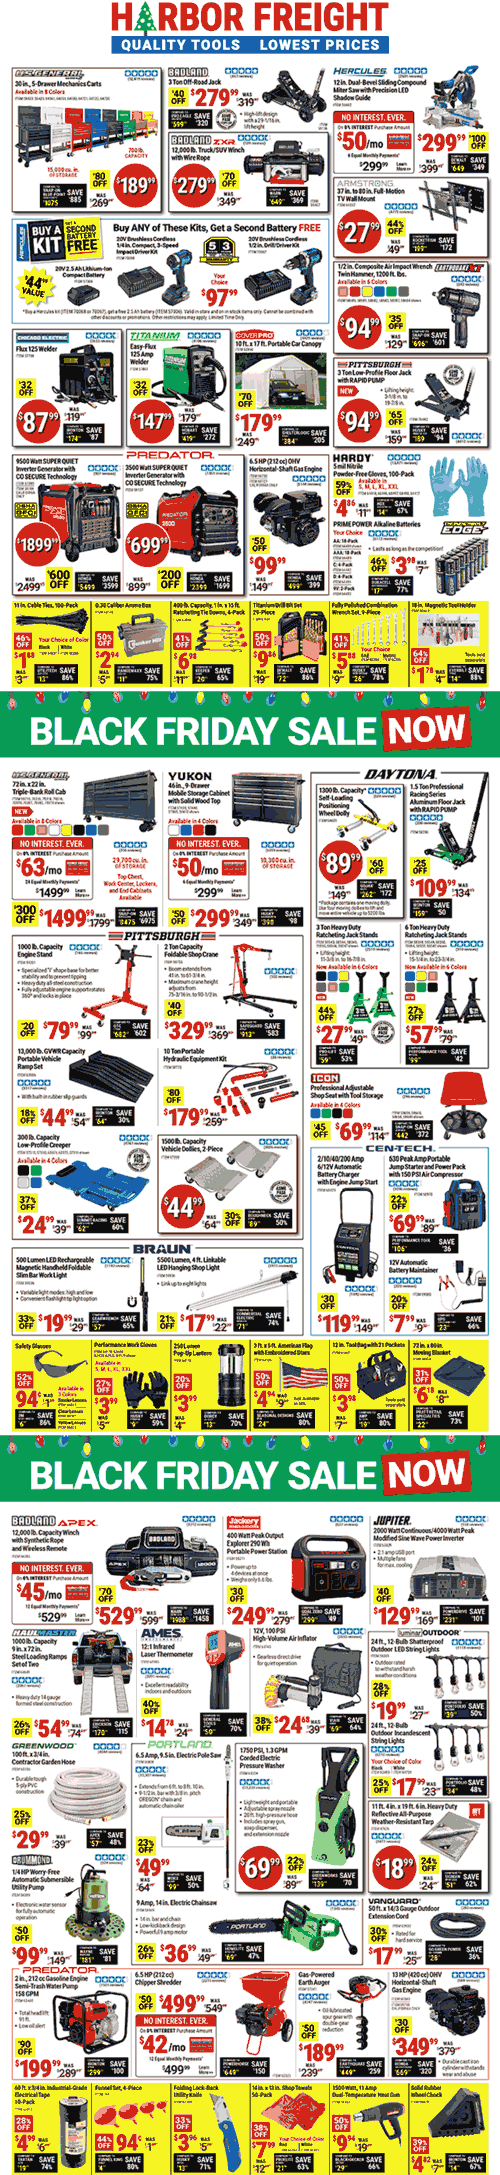 Various deals at Harbor Freight Tools #harborfreight